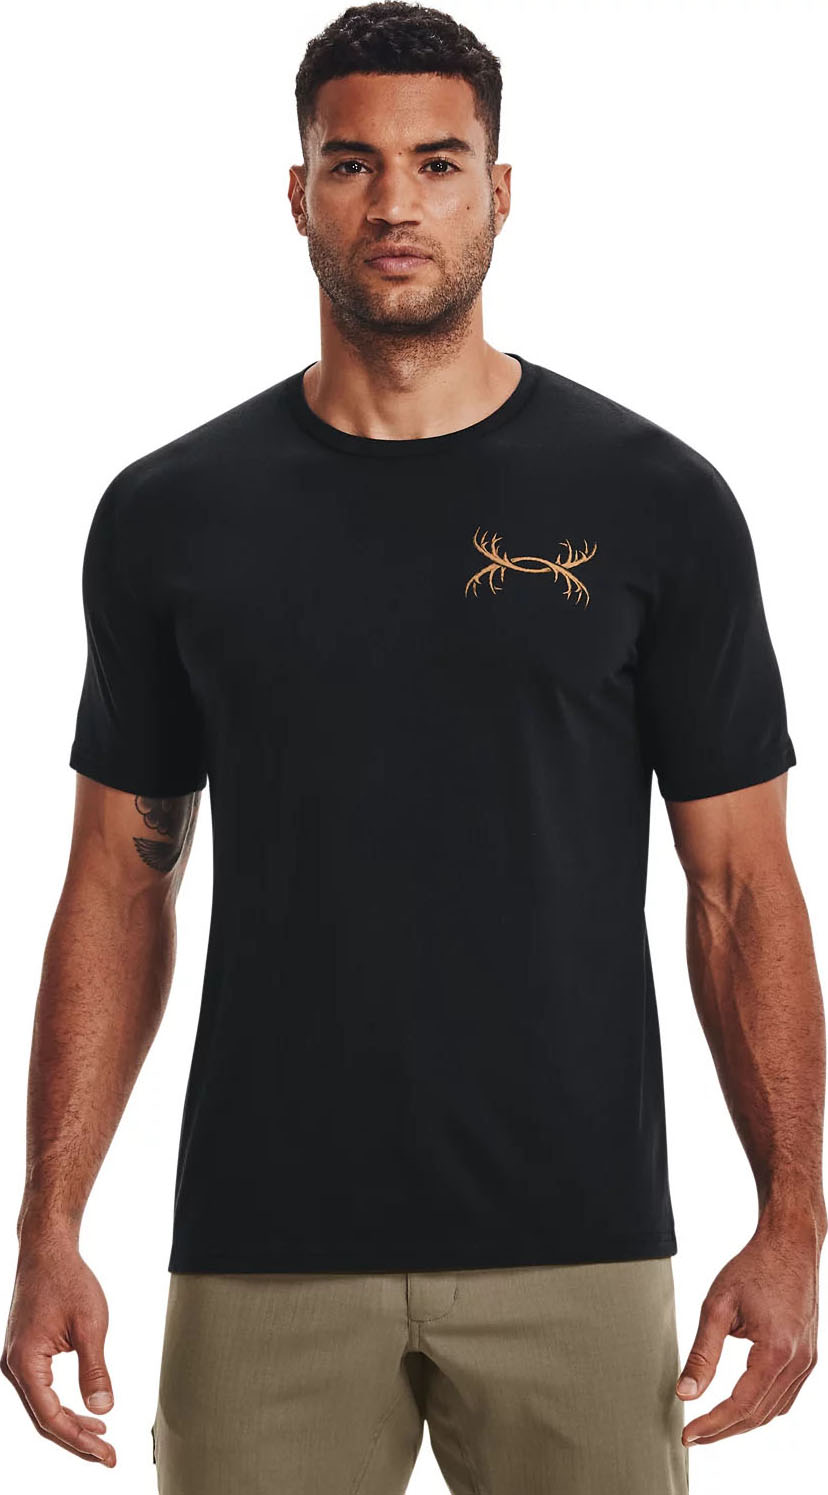 Under Armour - Mens Aggressive Whitetail T-Shirt